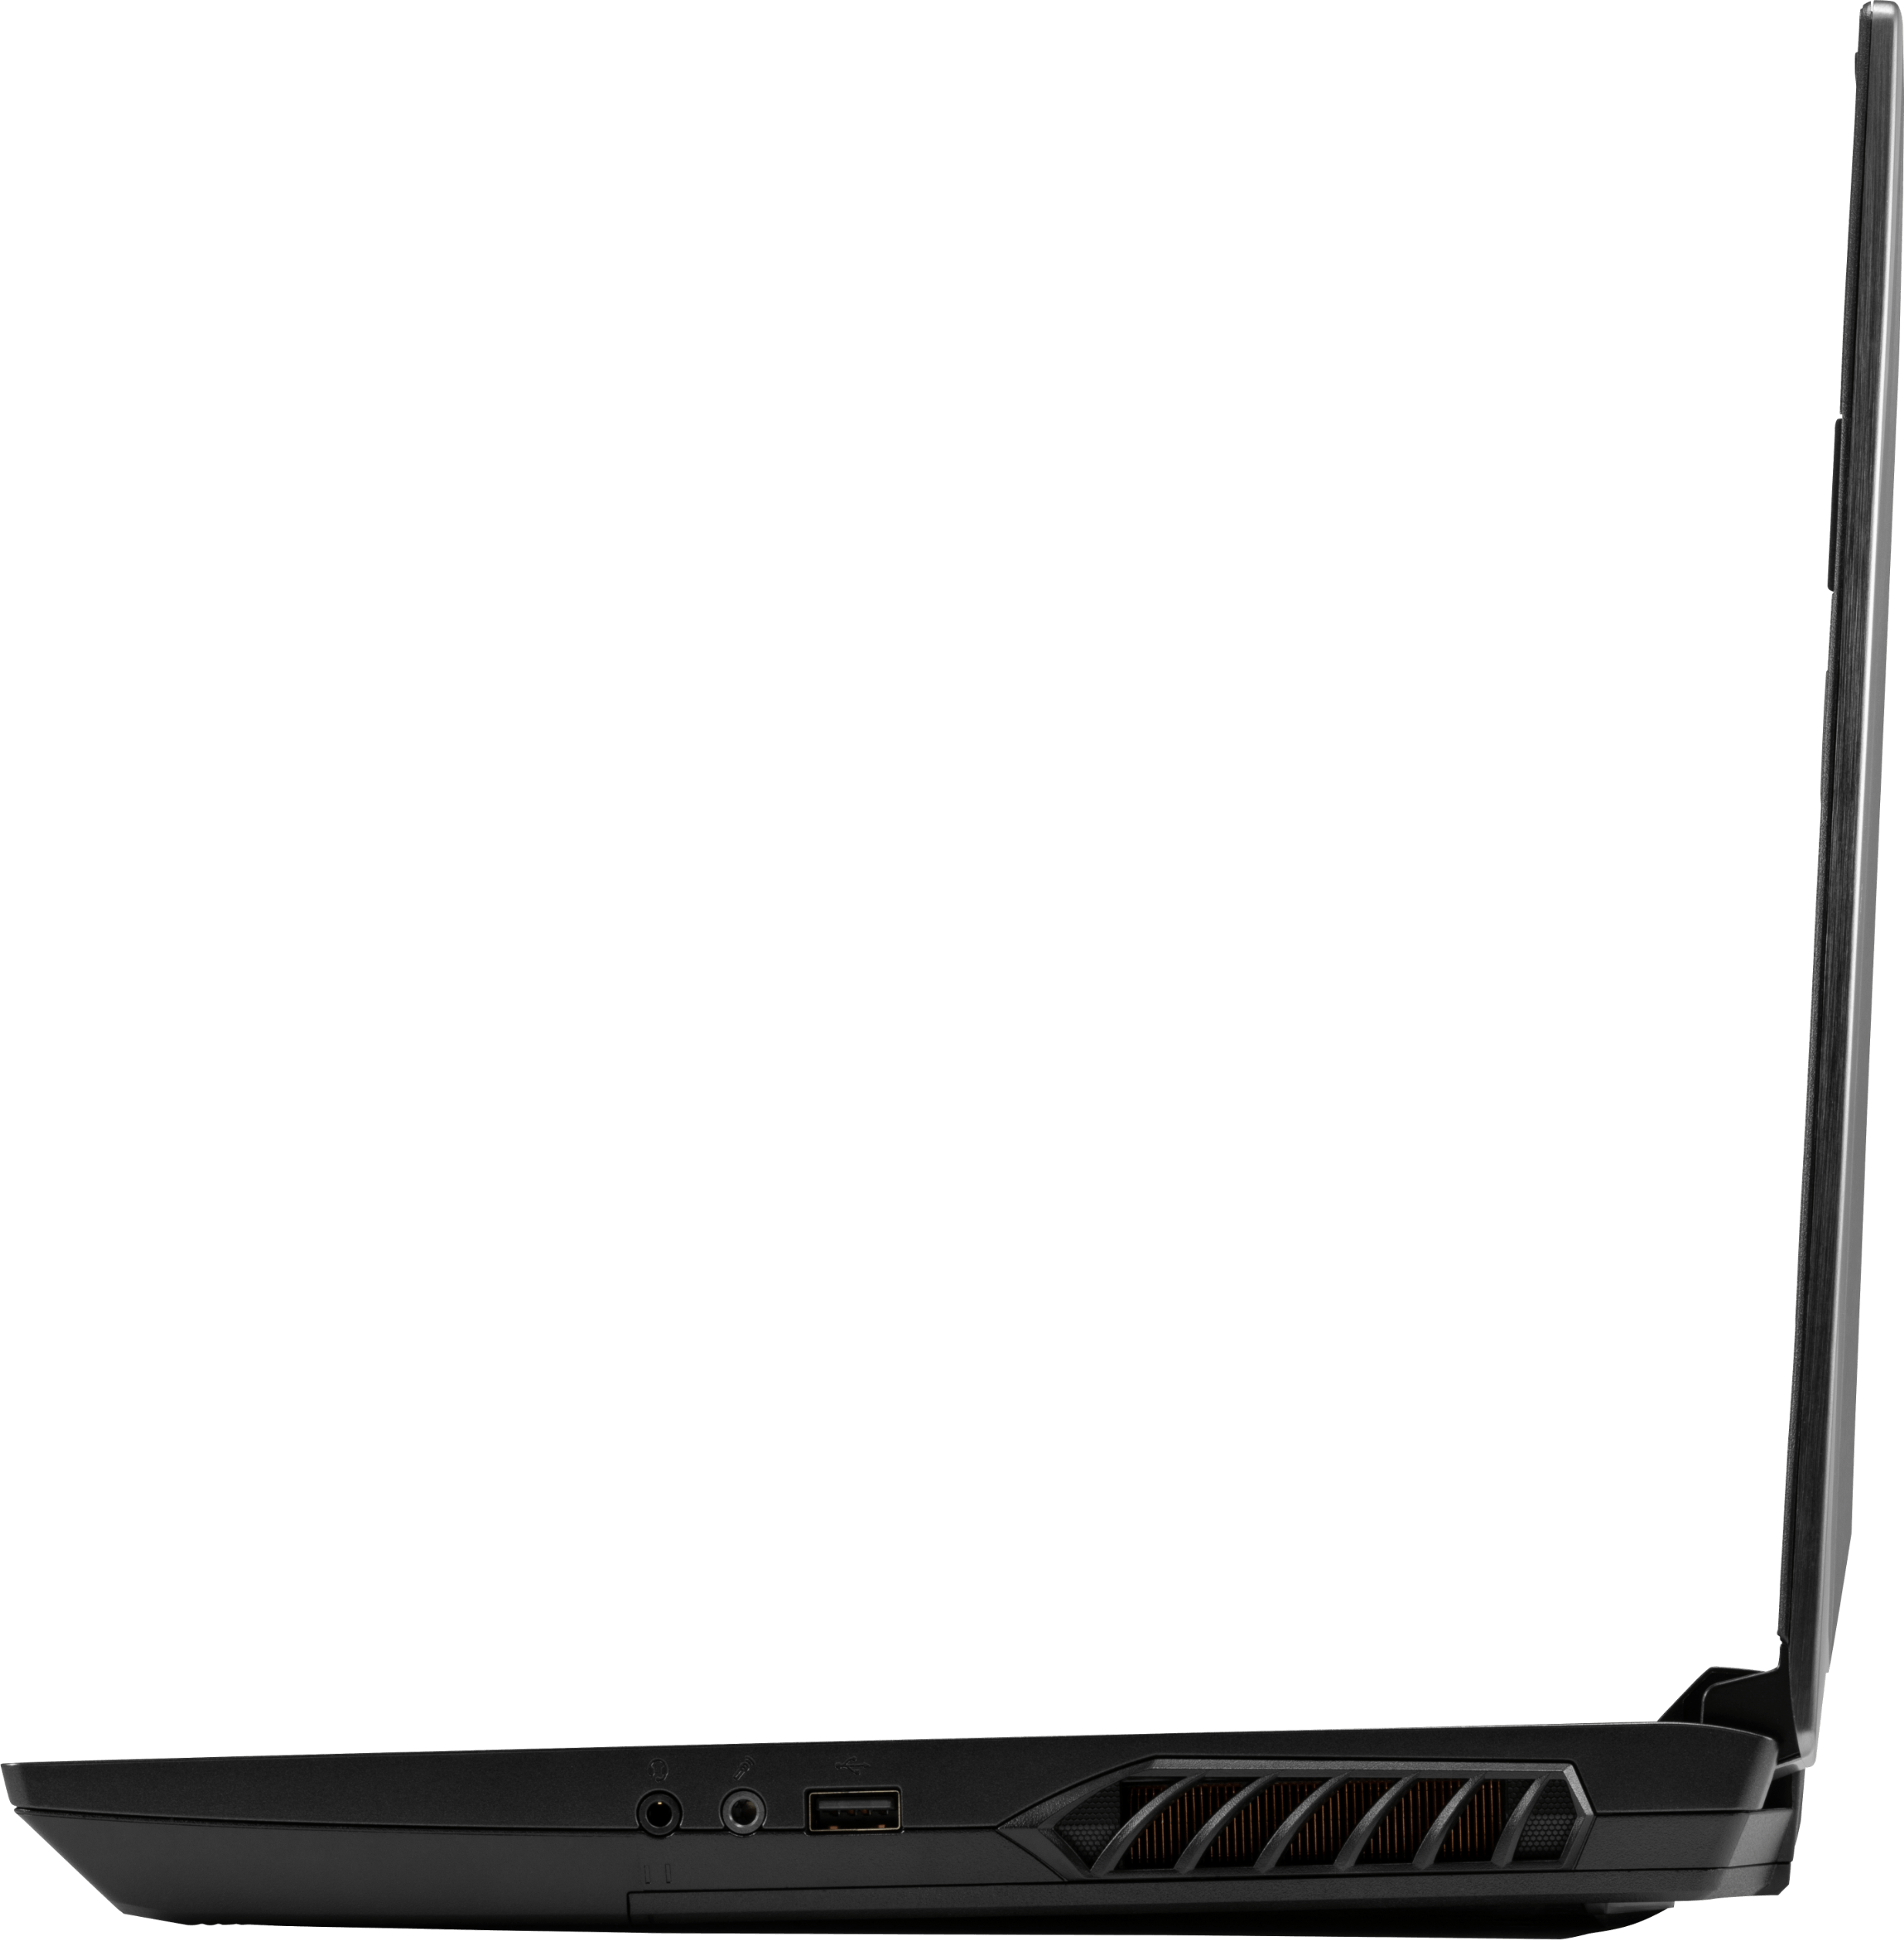 A right profile view of the Serval WS laptop’s ports, including mic jack, audio jack, and USB port.